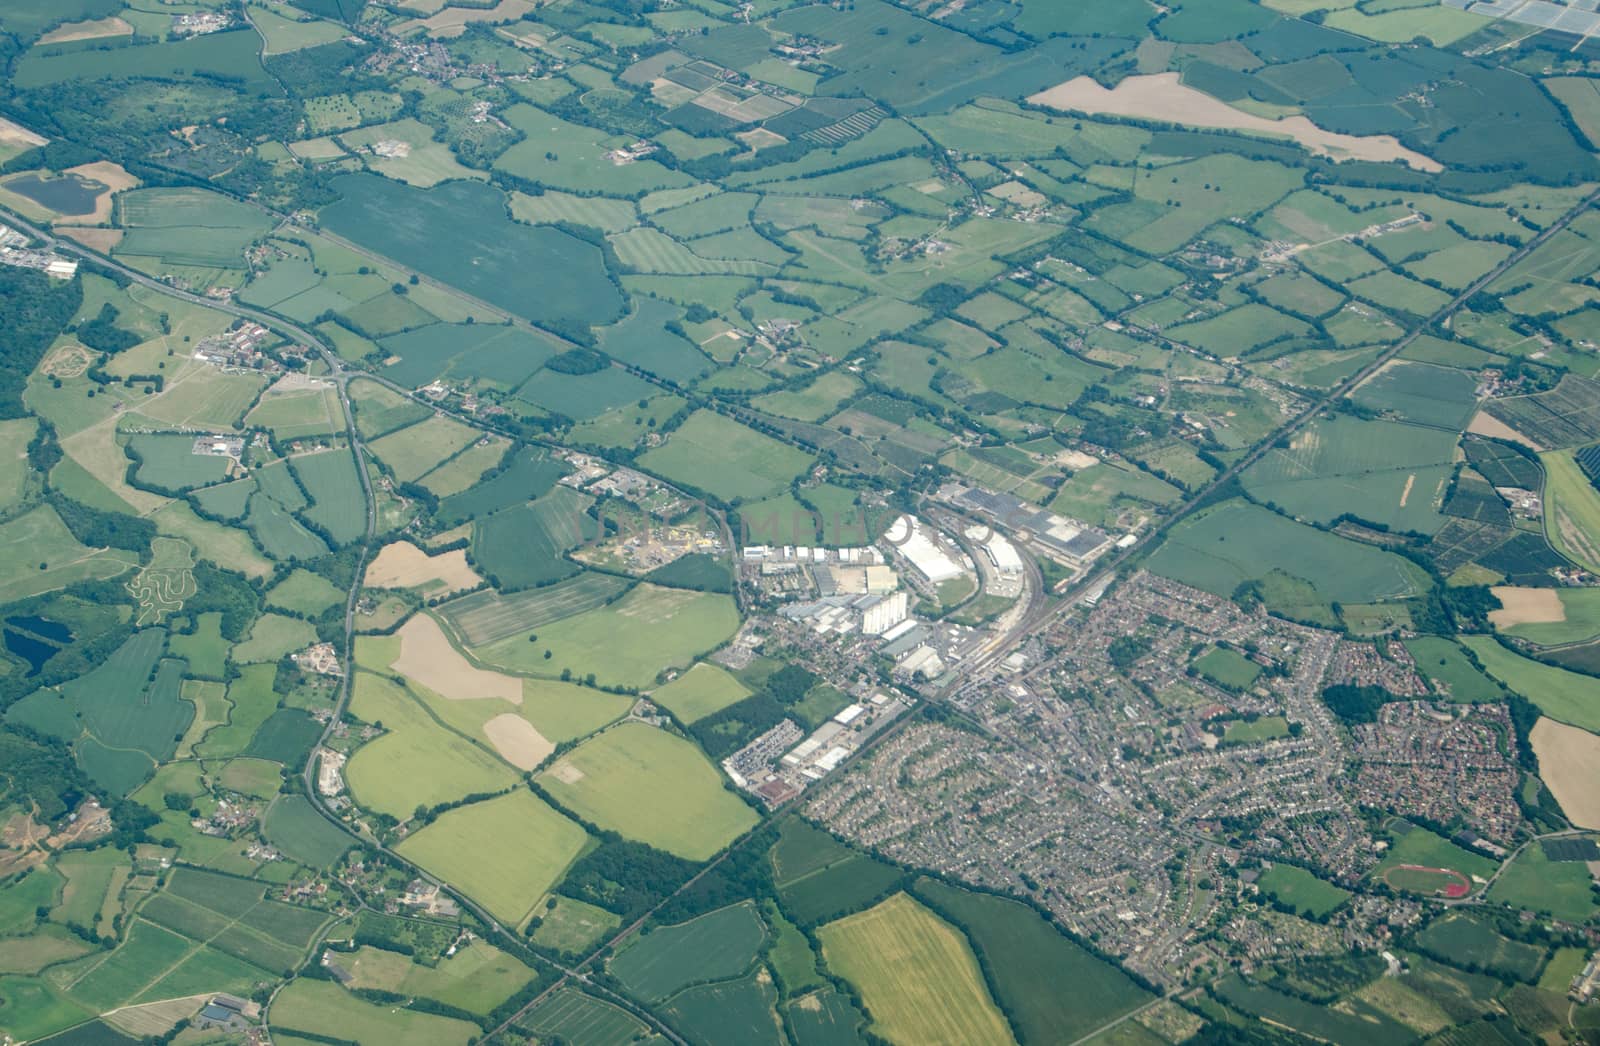 Aerial view of the town of Paddock Wood in Kent.  Part of the parish of Tunbridge Wells, it has a railway station and several food distribution warehouses. 